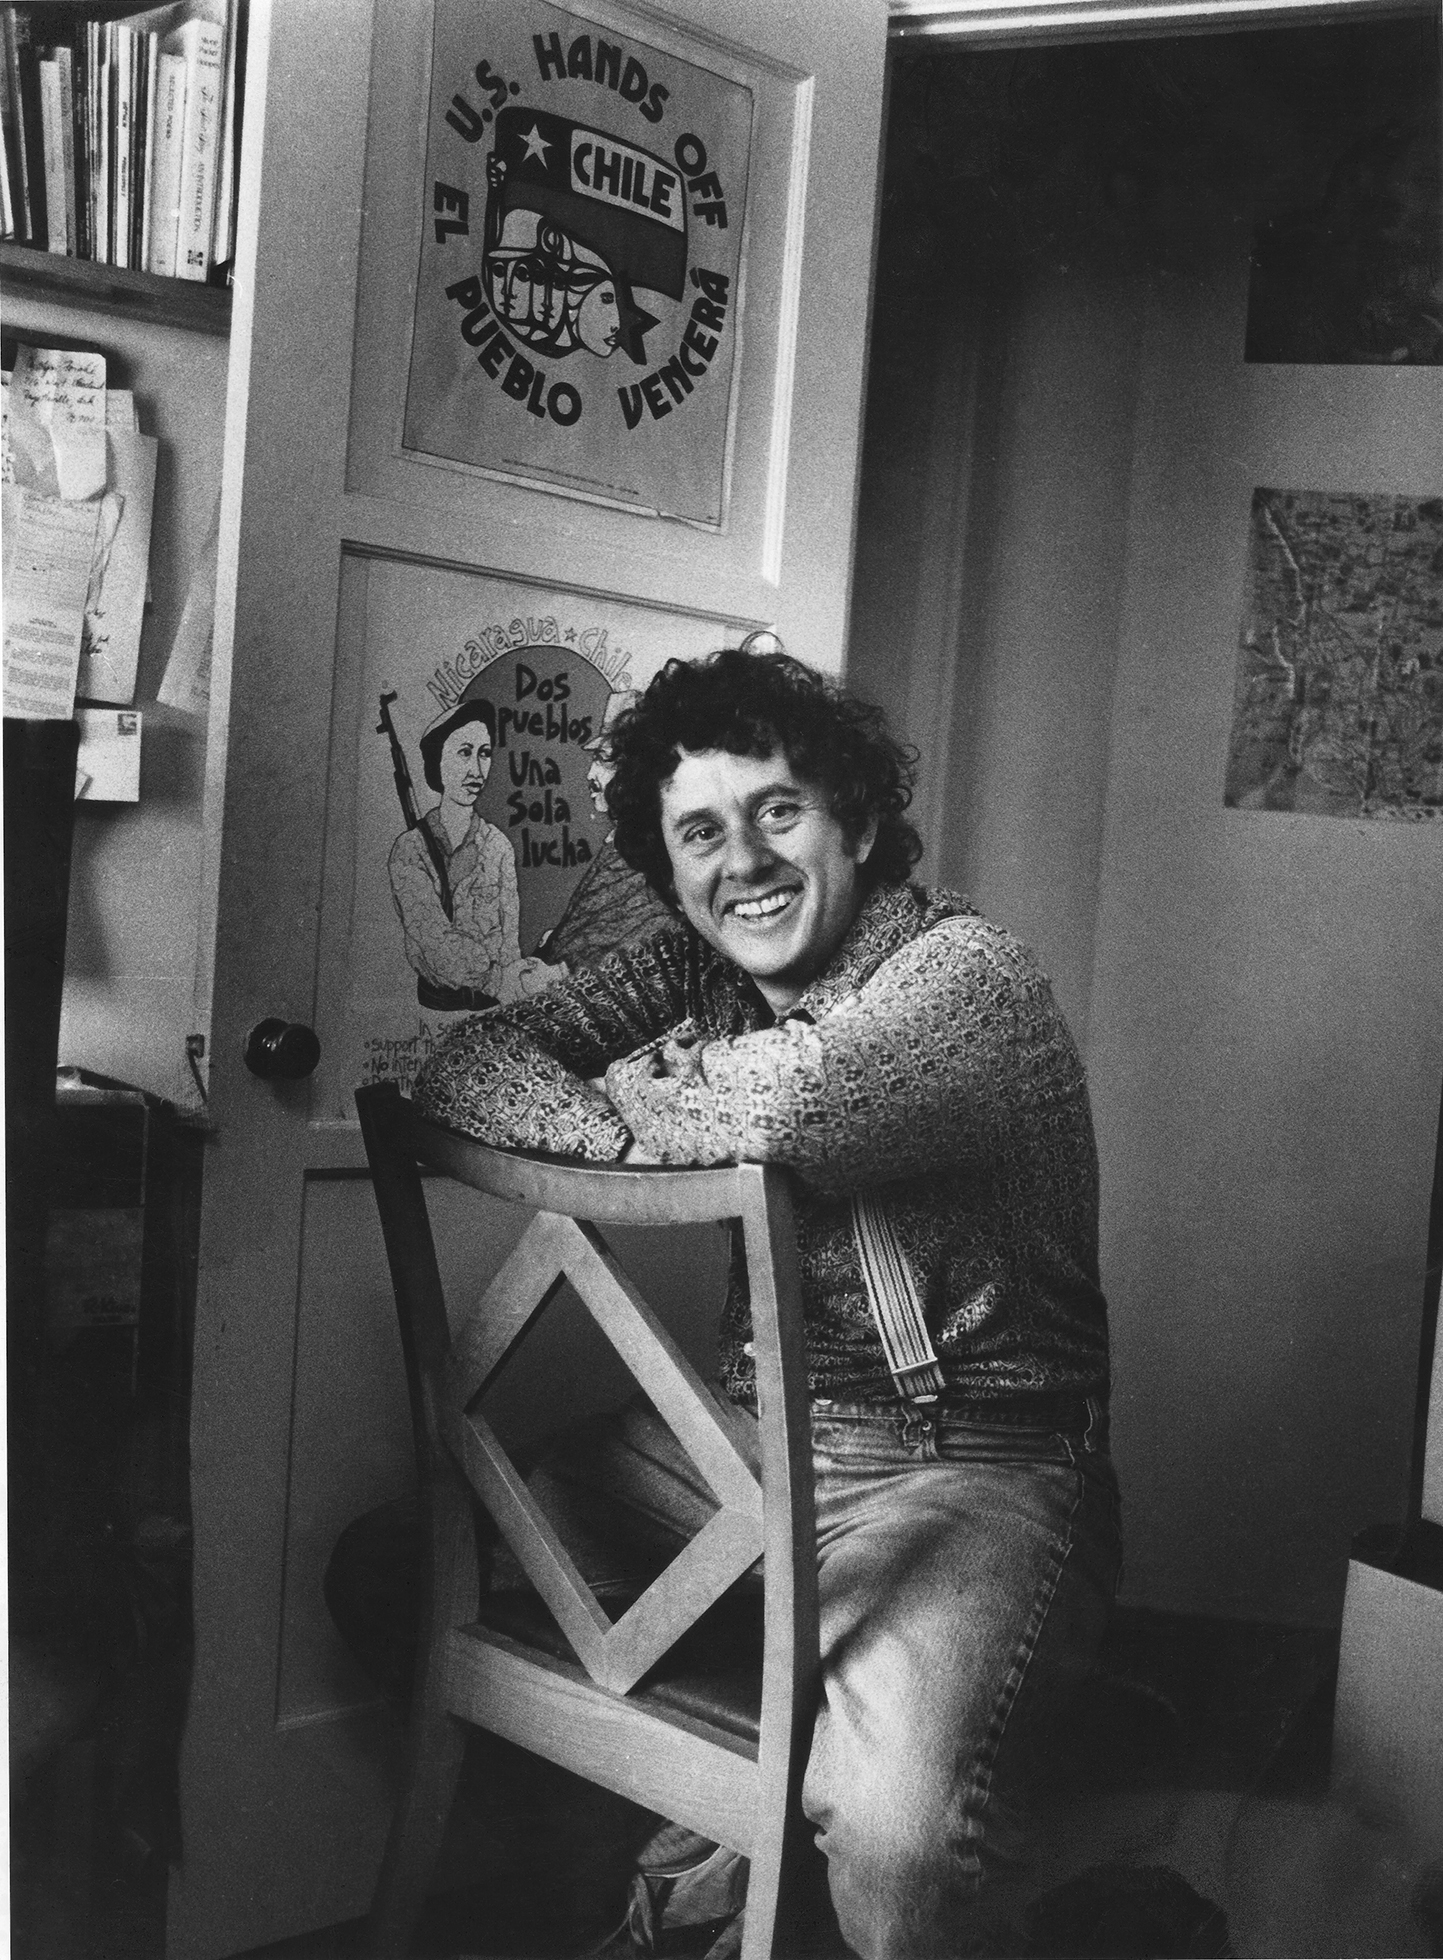 Steve Kowit is relaxed and smiling broadly sitting backward in a chair with his arms resting on the top. He is wearing jeans and a sweater and suspenders.